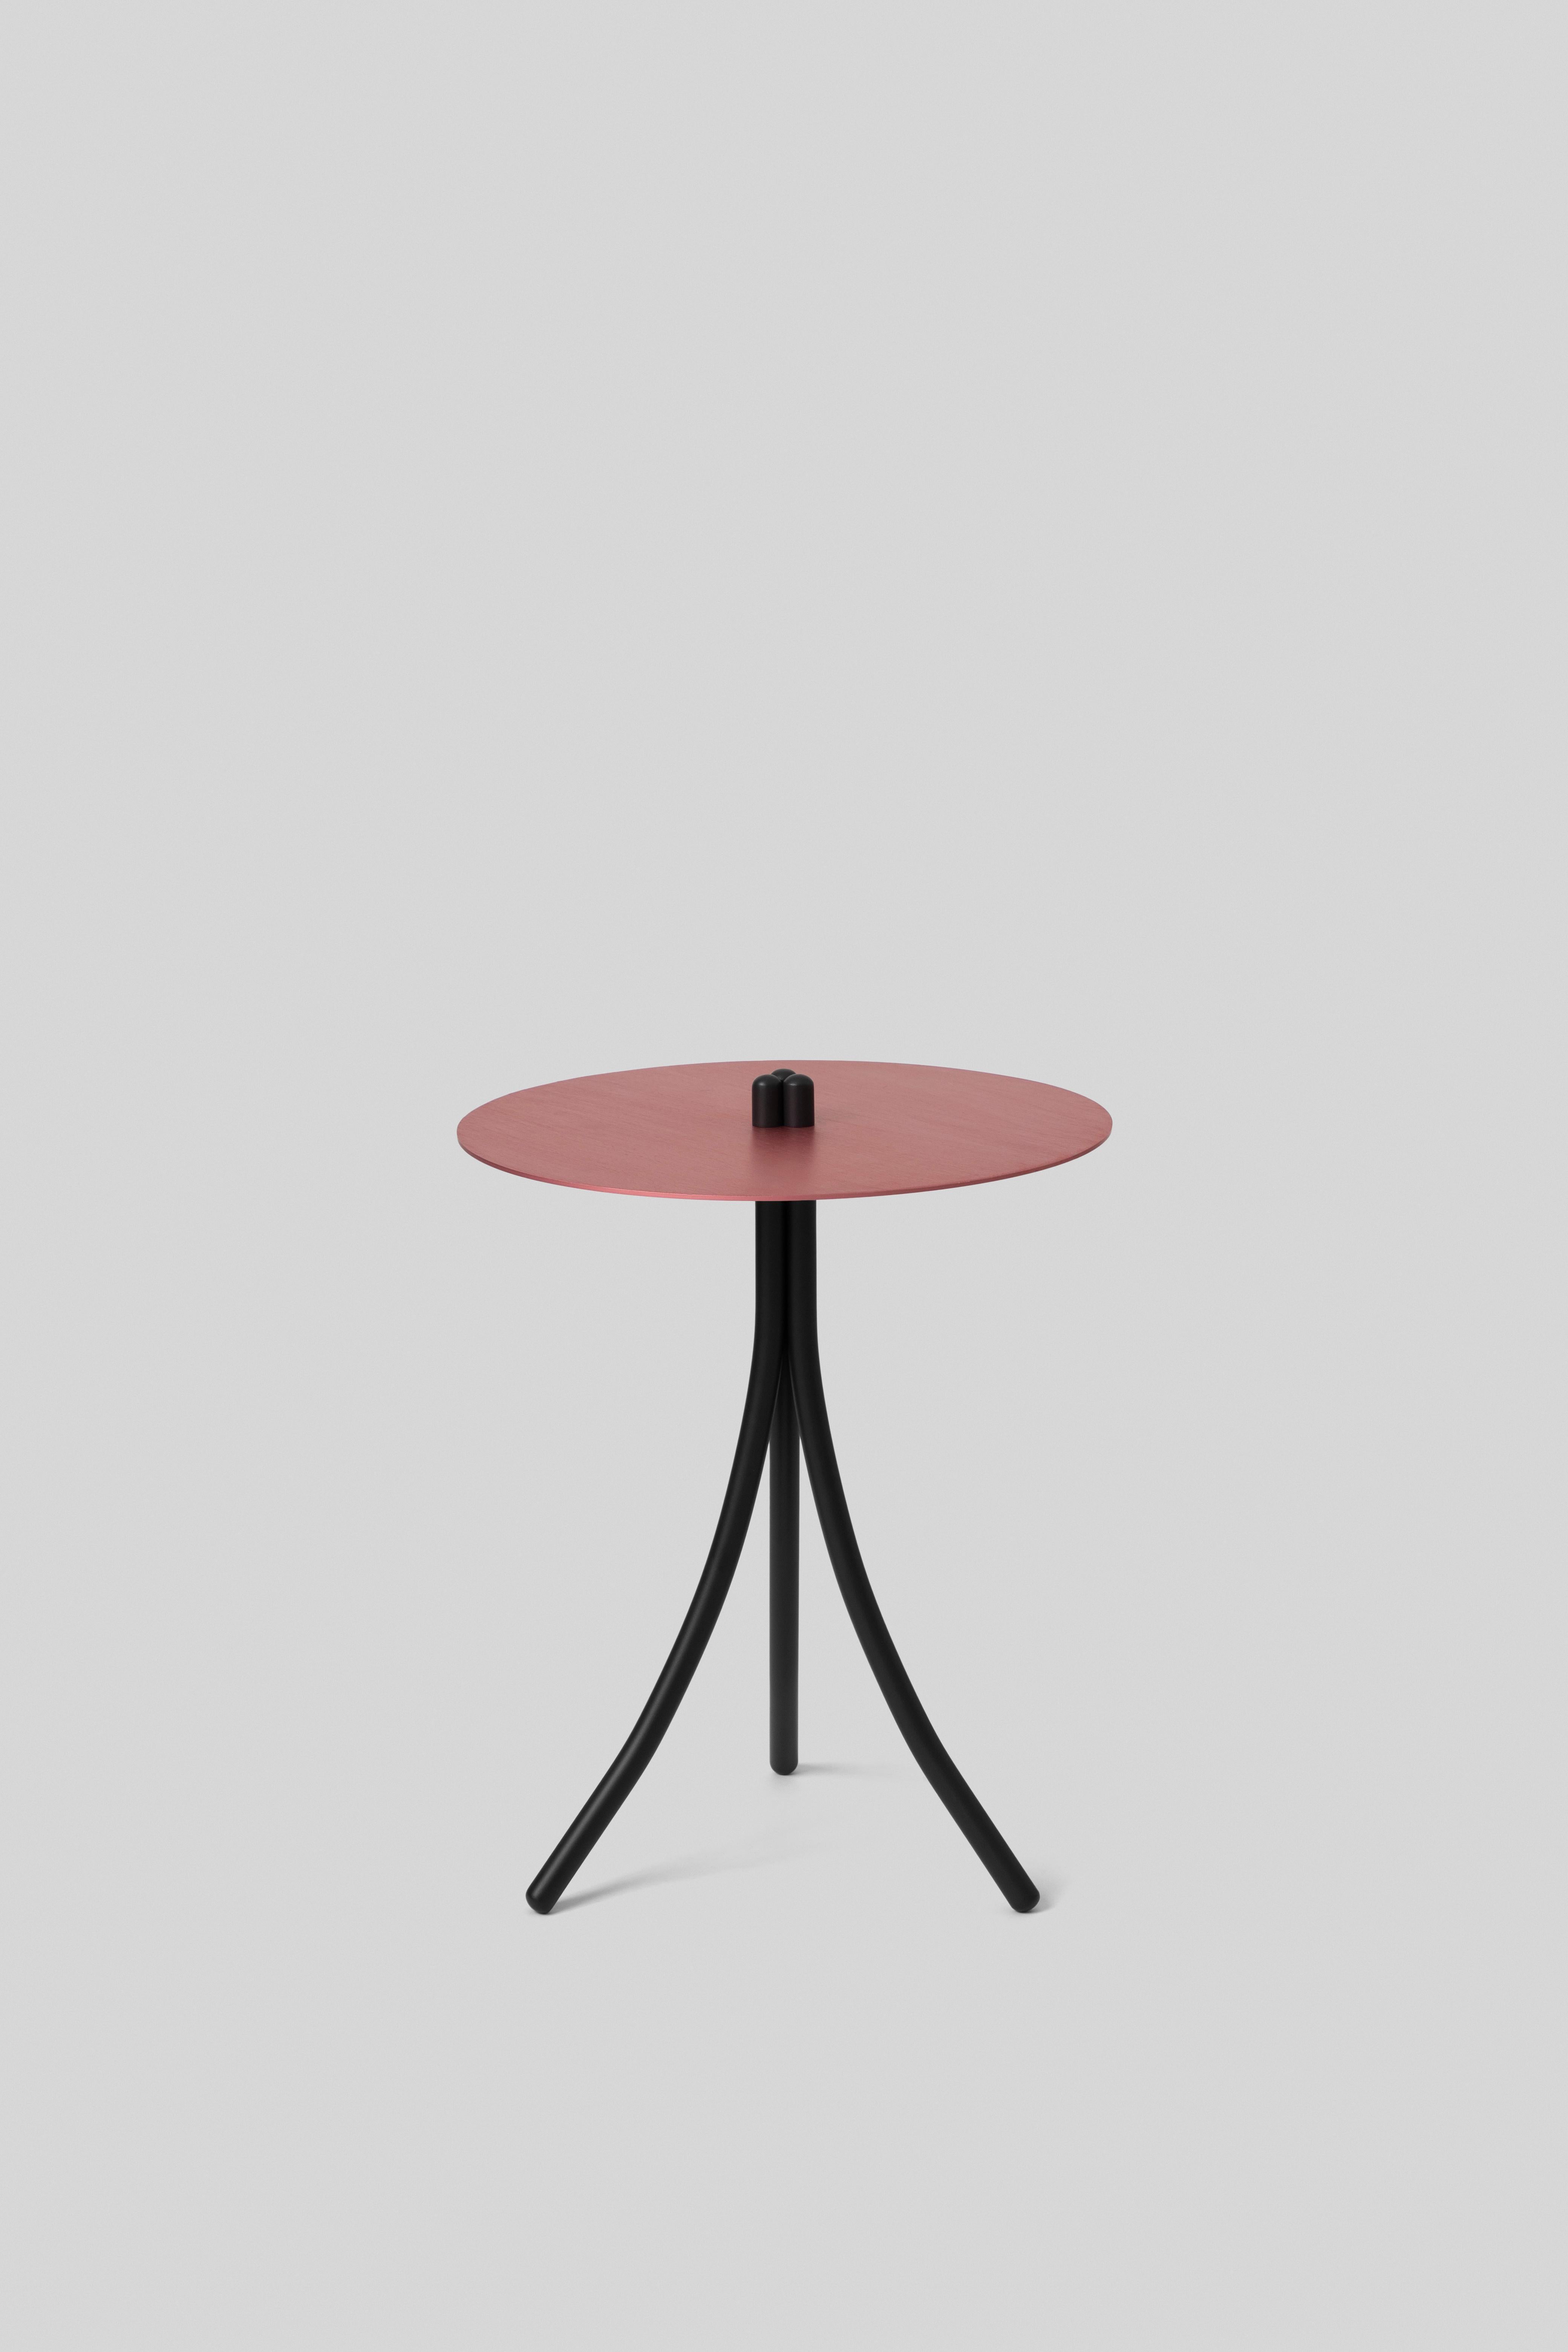 Anodized Contemporary Short Aluminum Side Table 